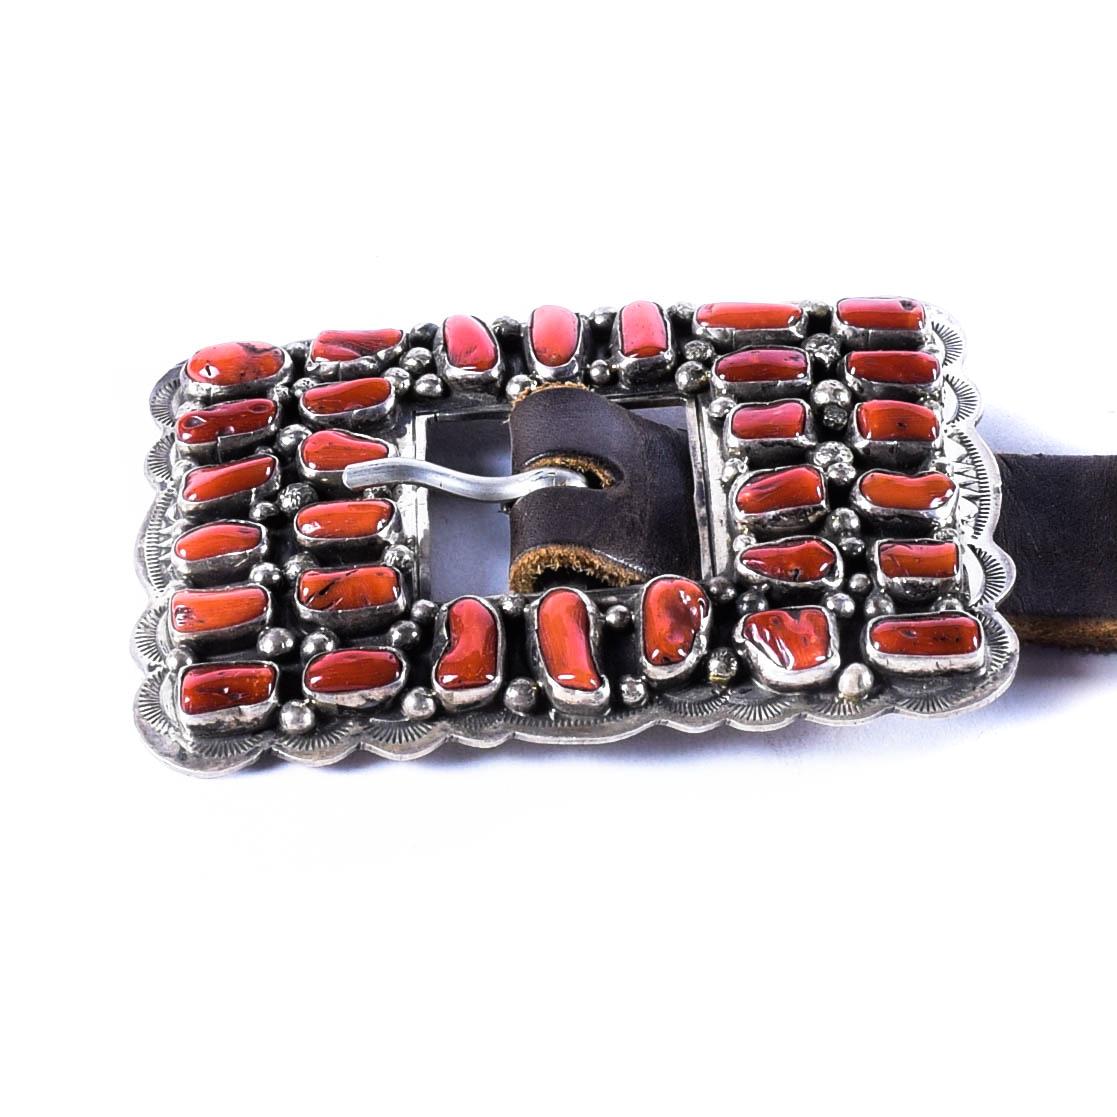 Excellent quality Navajo coral concho belt, with high grade coral conchos; marked sterling silver. Signed 